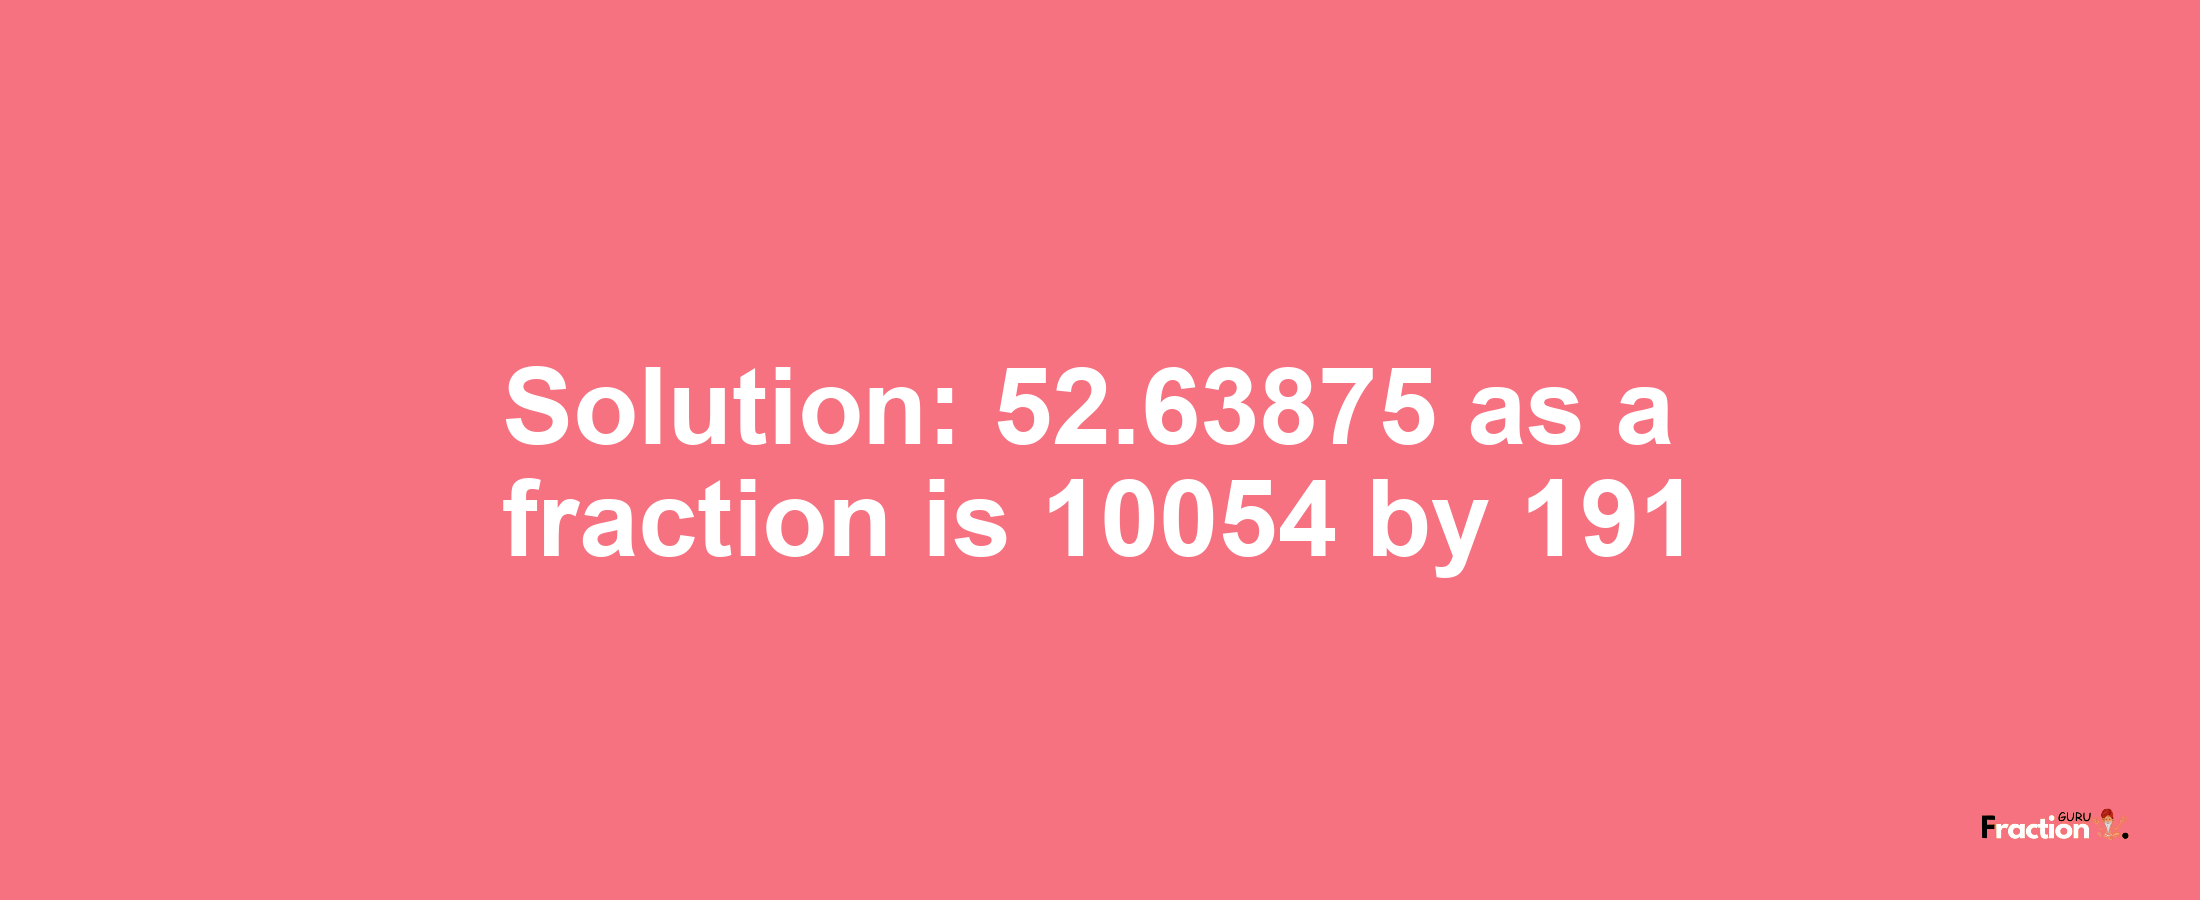 Solution:52.63875 as a fraction is 10054/191